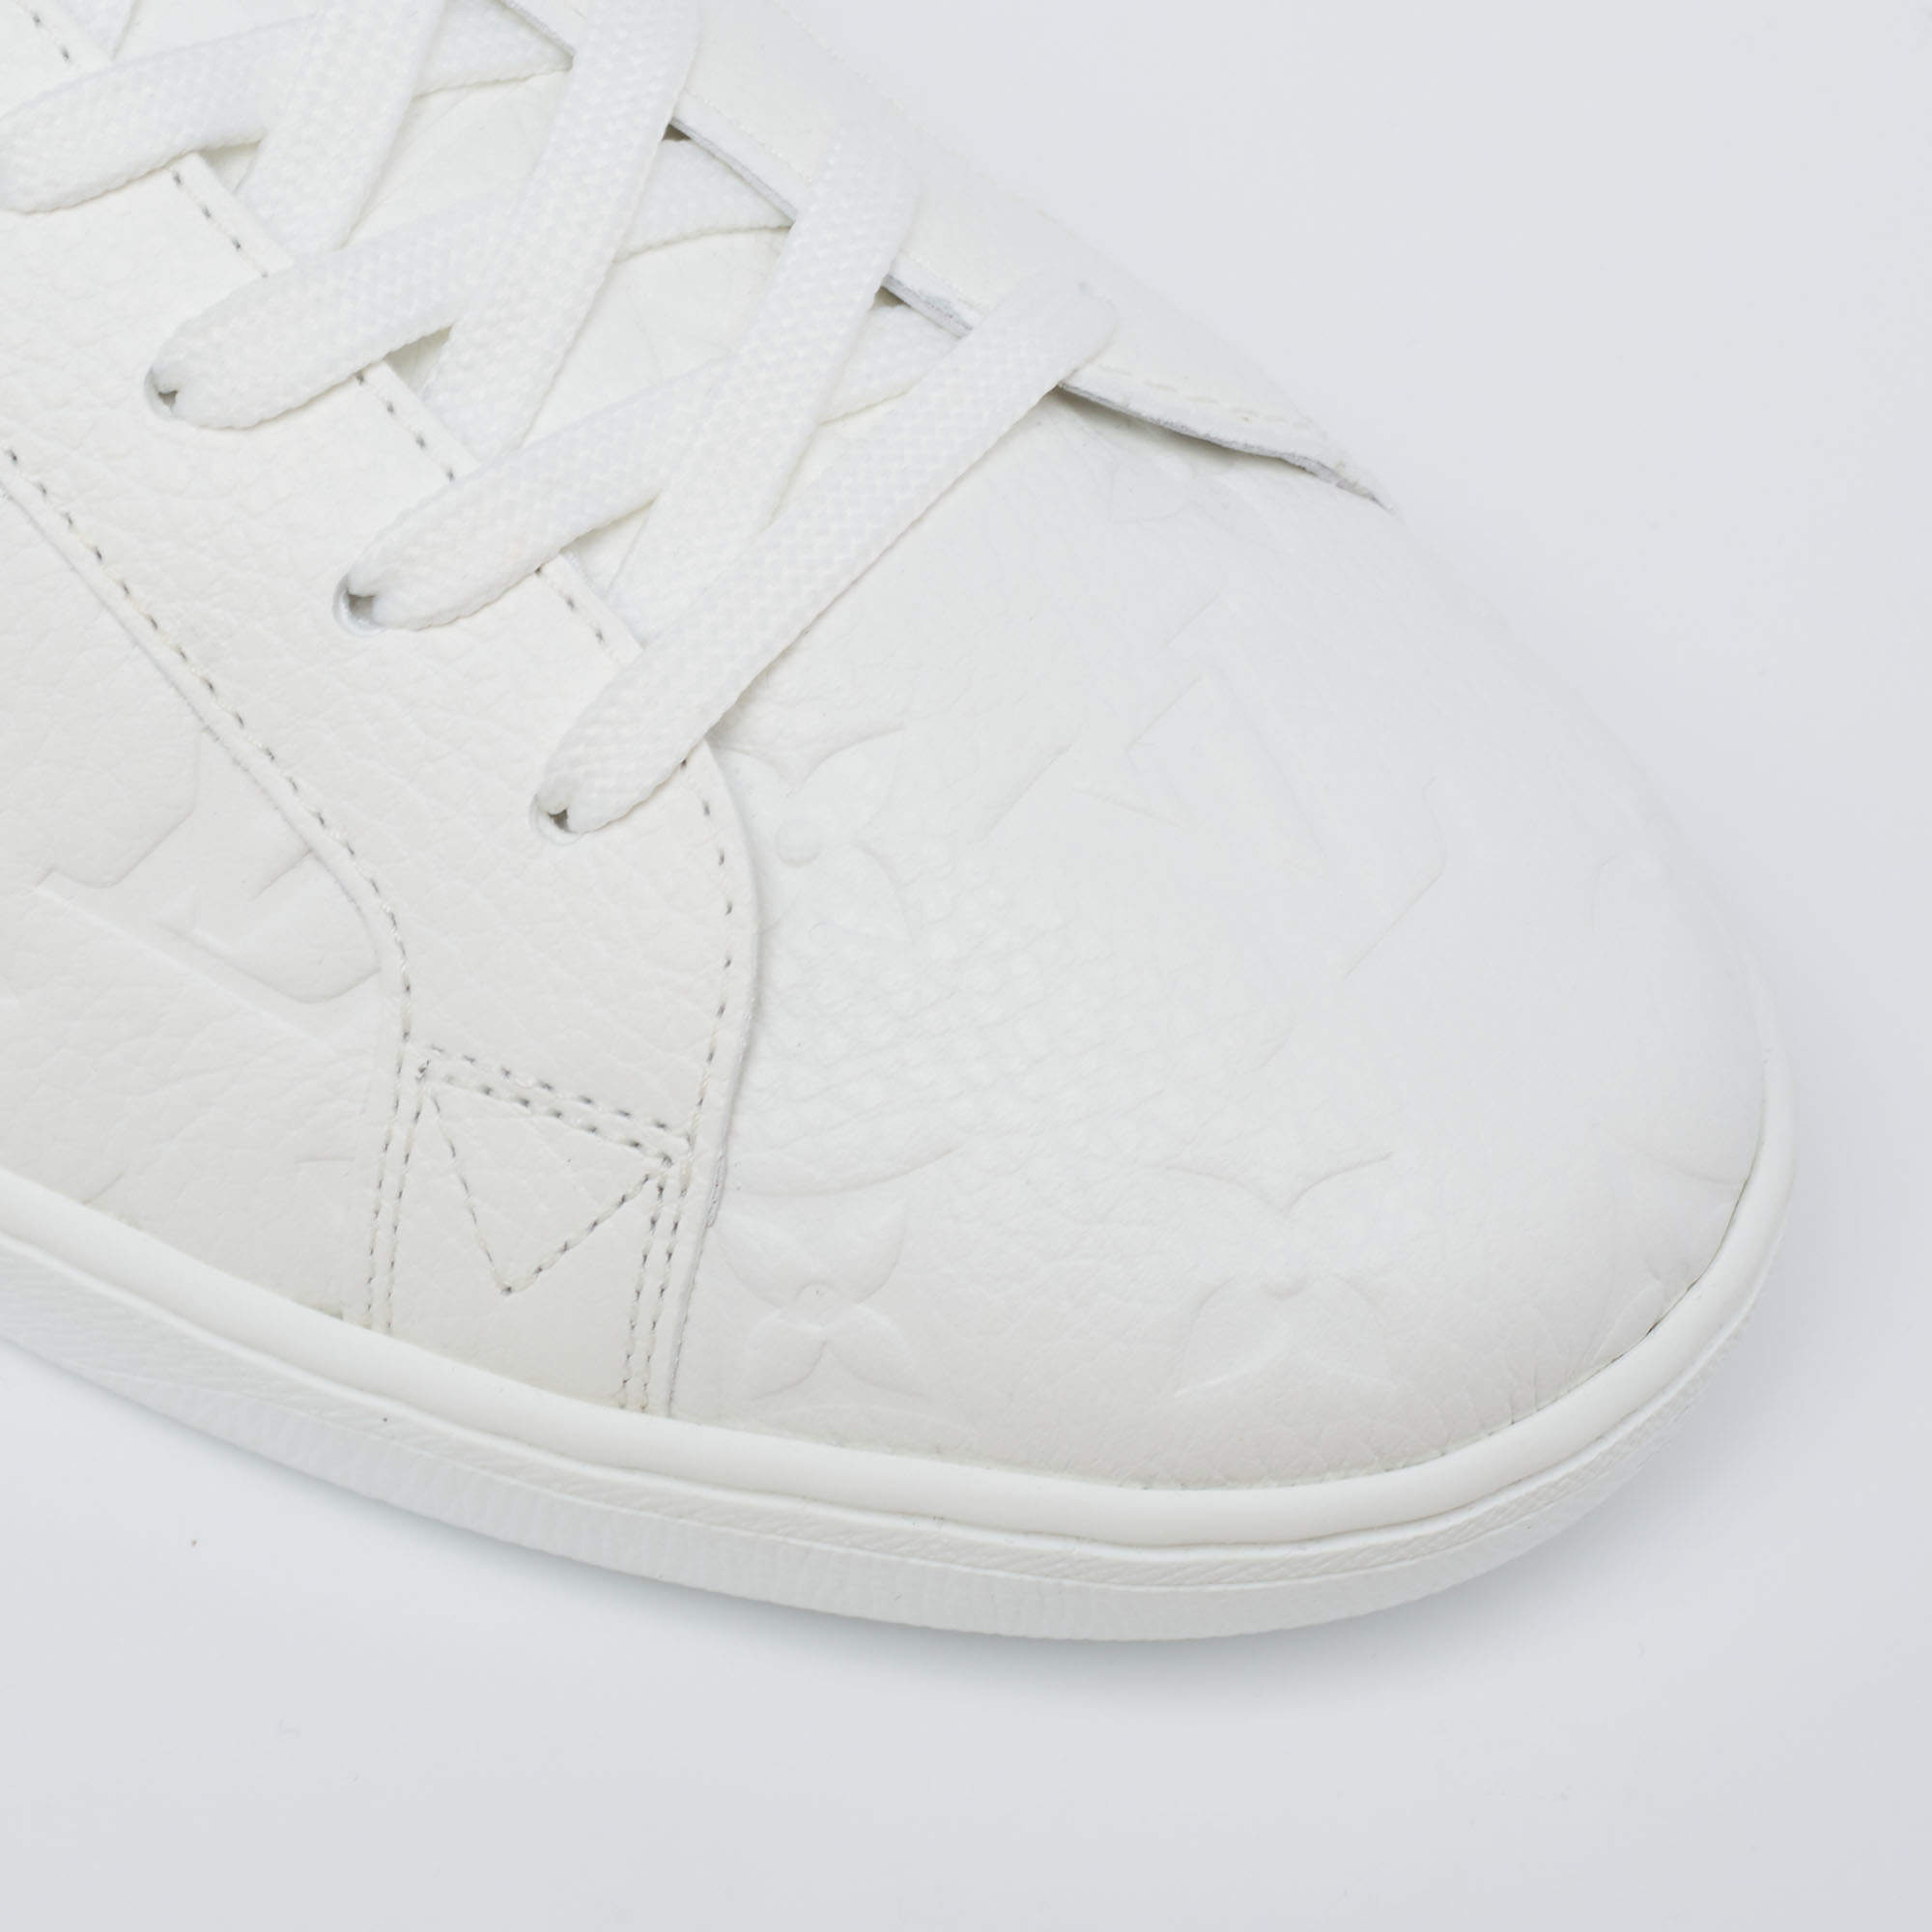 Luxembourg leather low trainers Louis Vuitton White size 8 US in Leather -  37335056